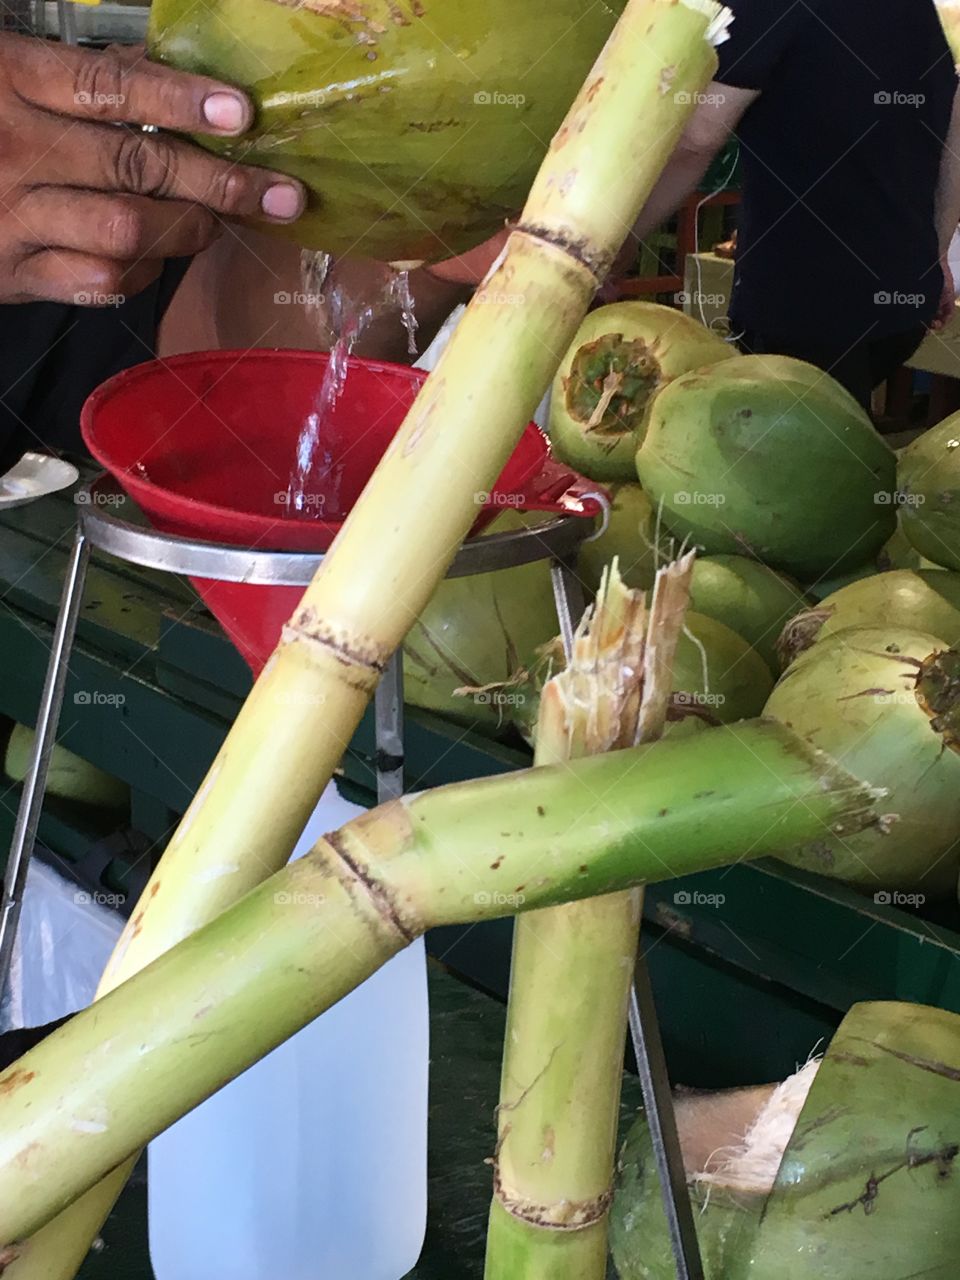 Coconut and Sigar Cane